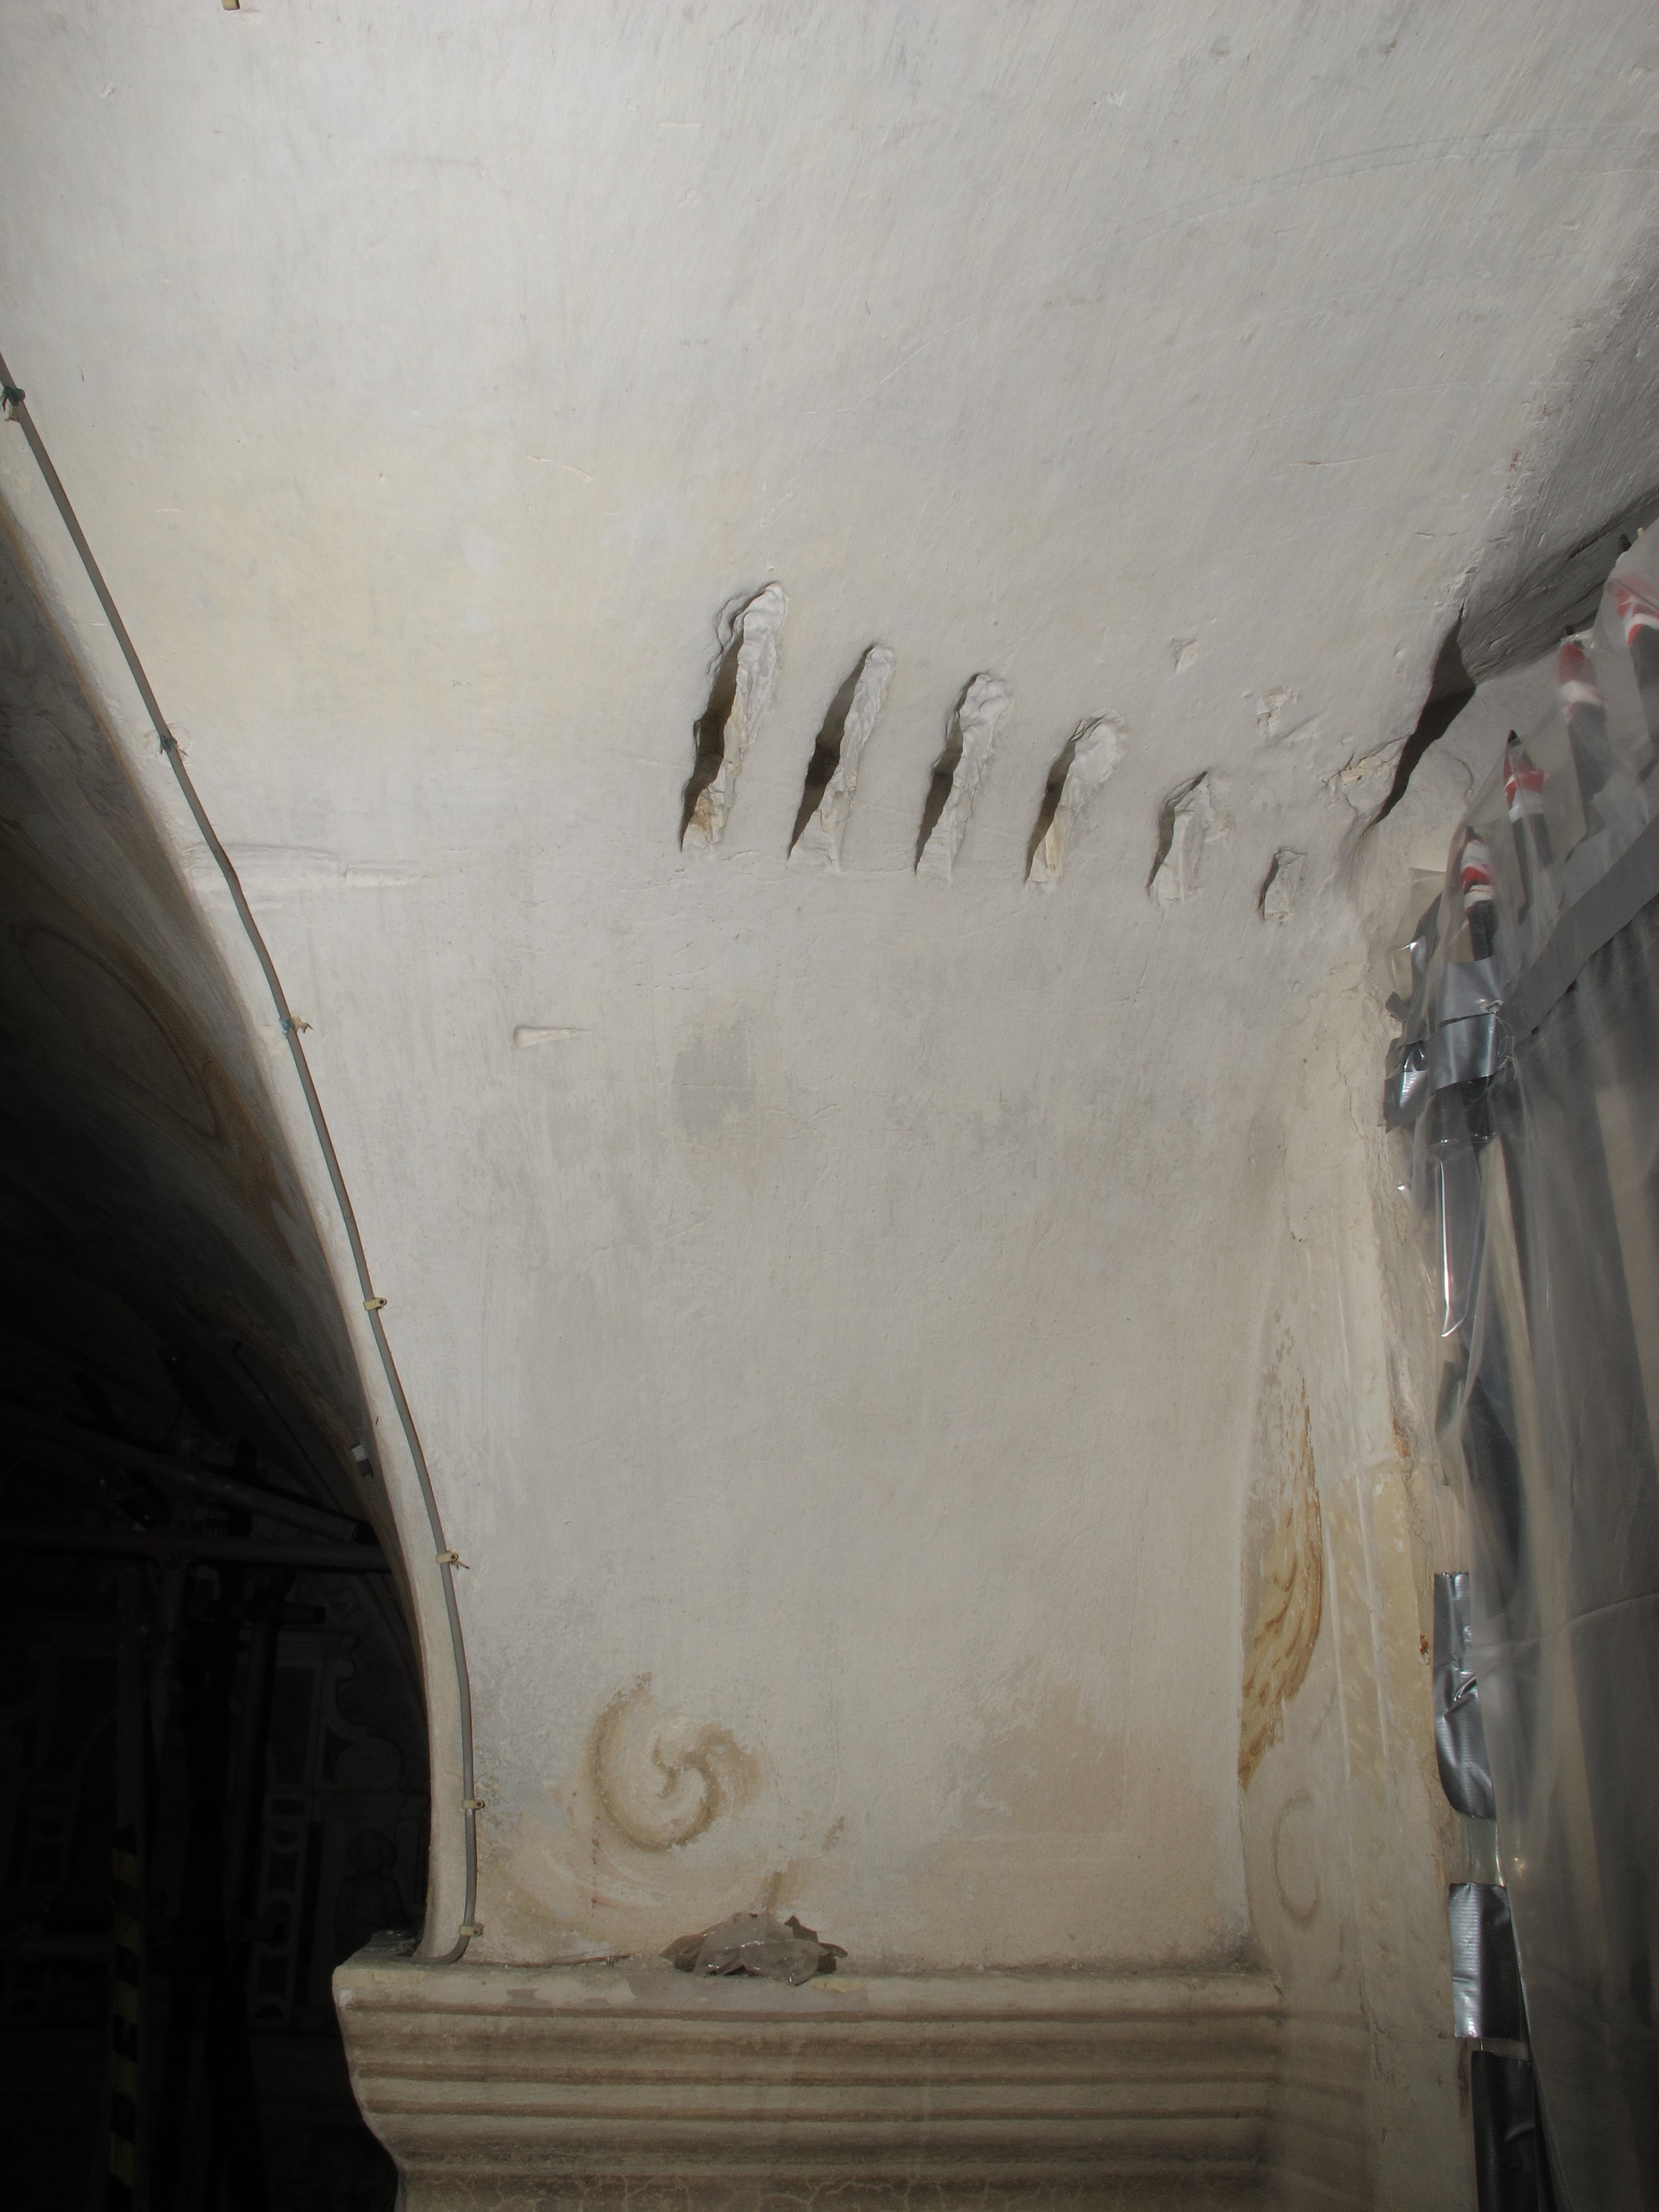  A section of wall painting obscured by layers of limewash was uncovered.  Image © Courtauld CWPD 